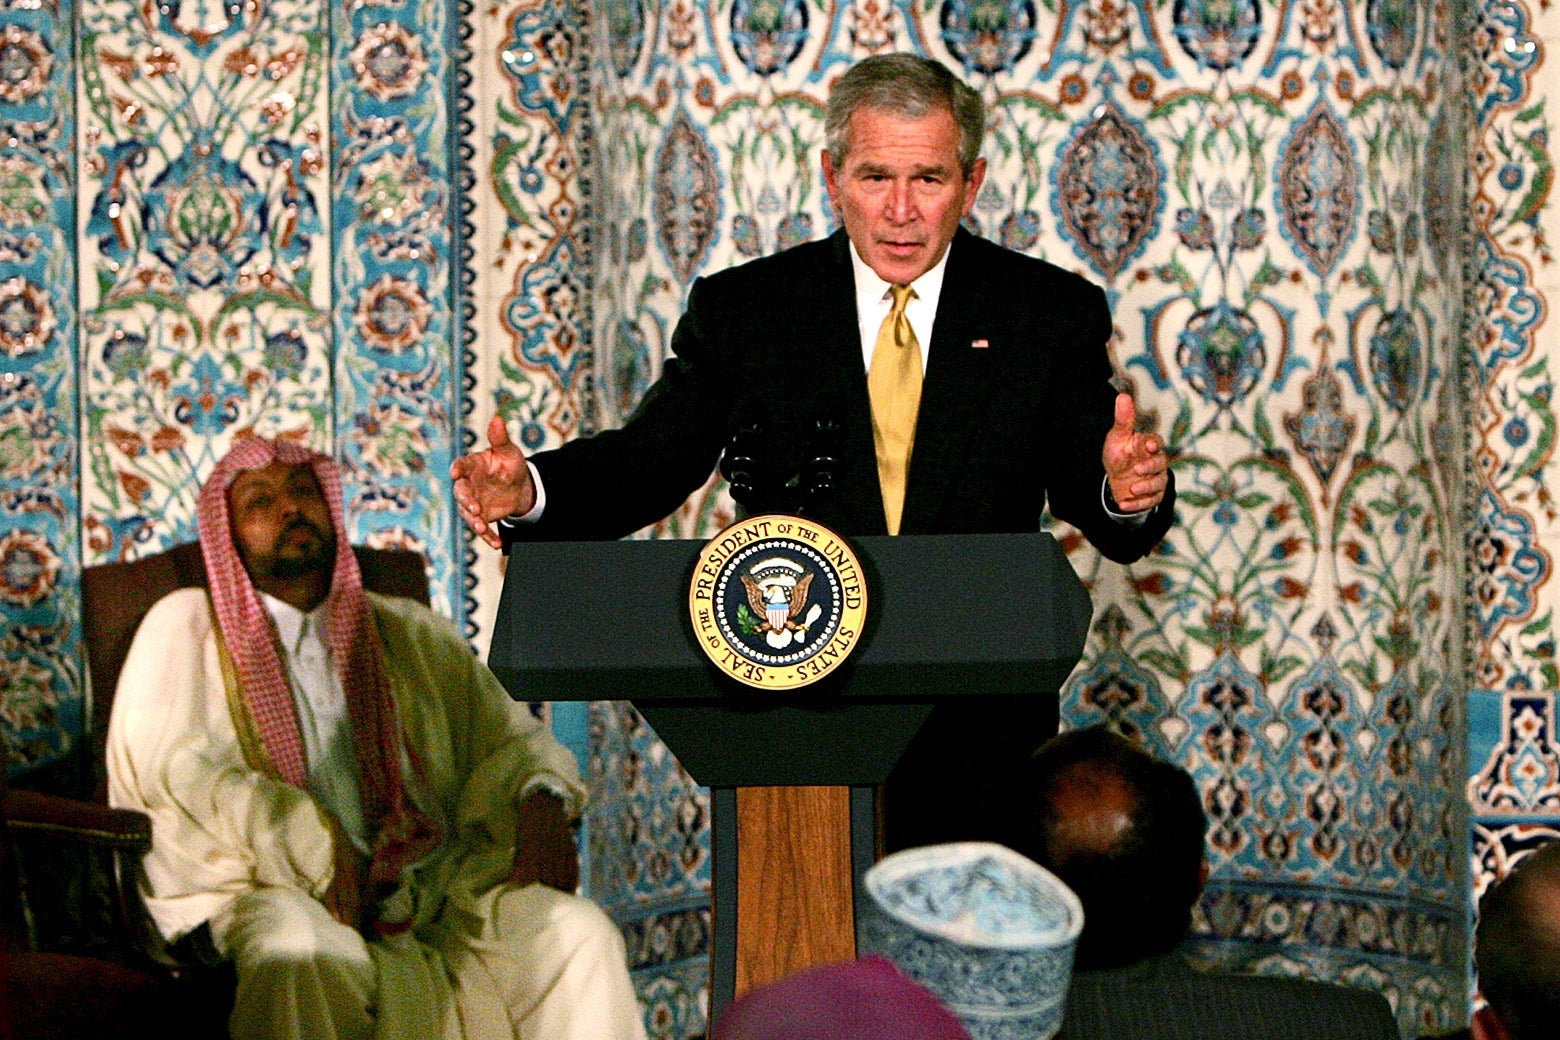 Bush gestures with his hands while speaking at a lectern to a group of Muslims. A Muslim leader is seated to his right.